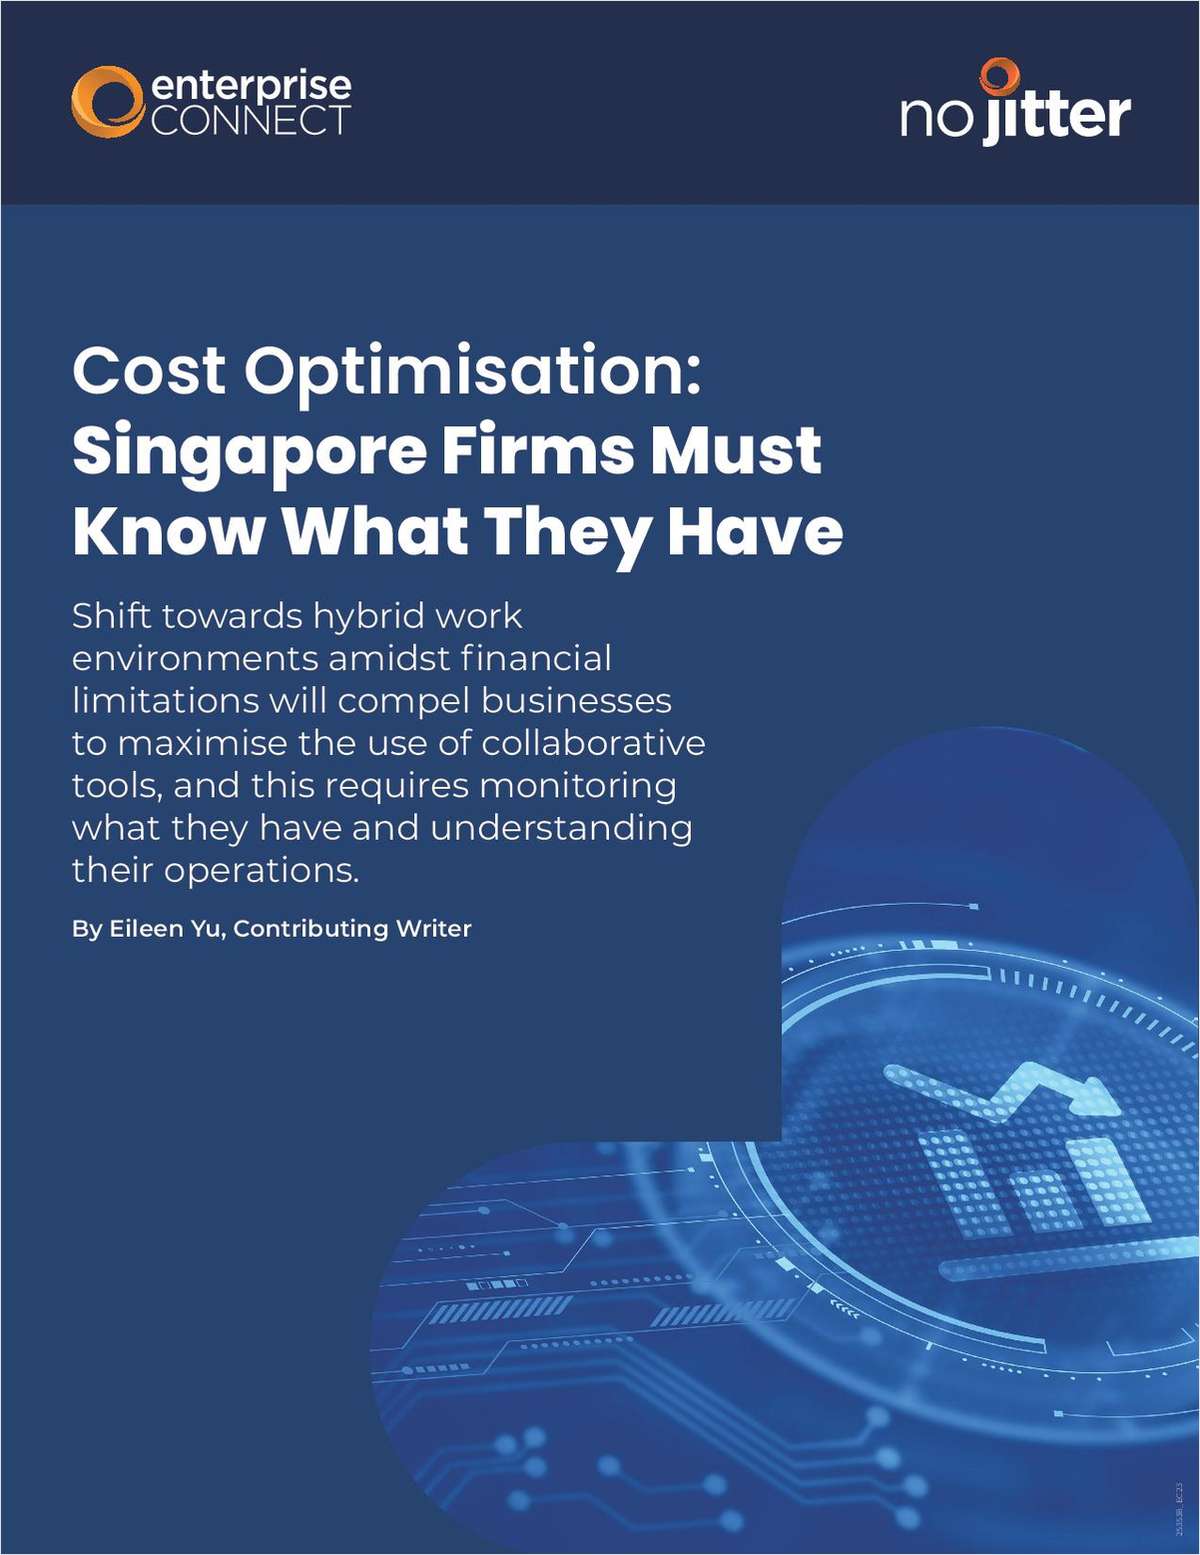 Cost Optimisation: Singapore Firms Must Know What They Have